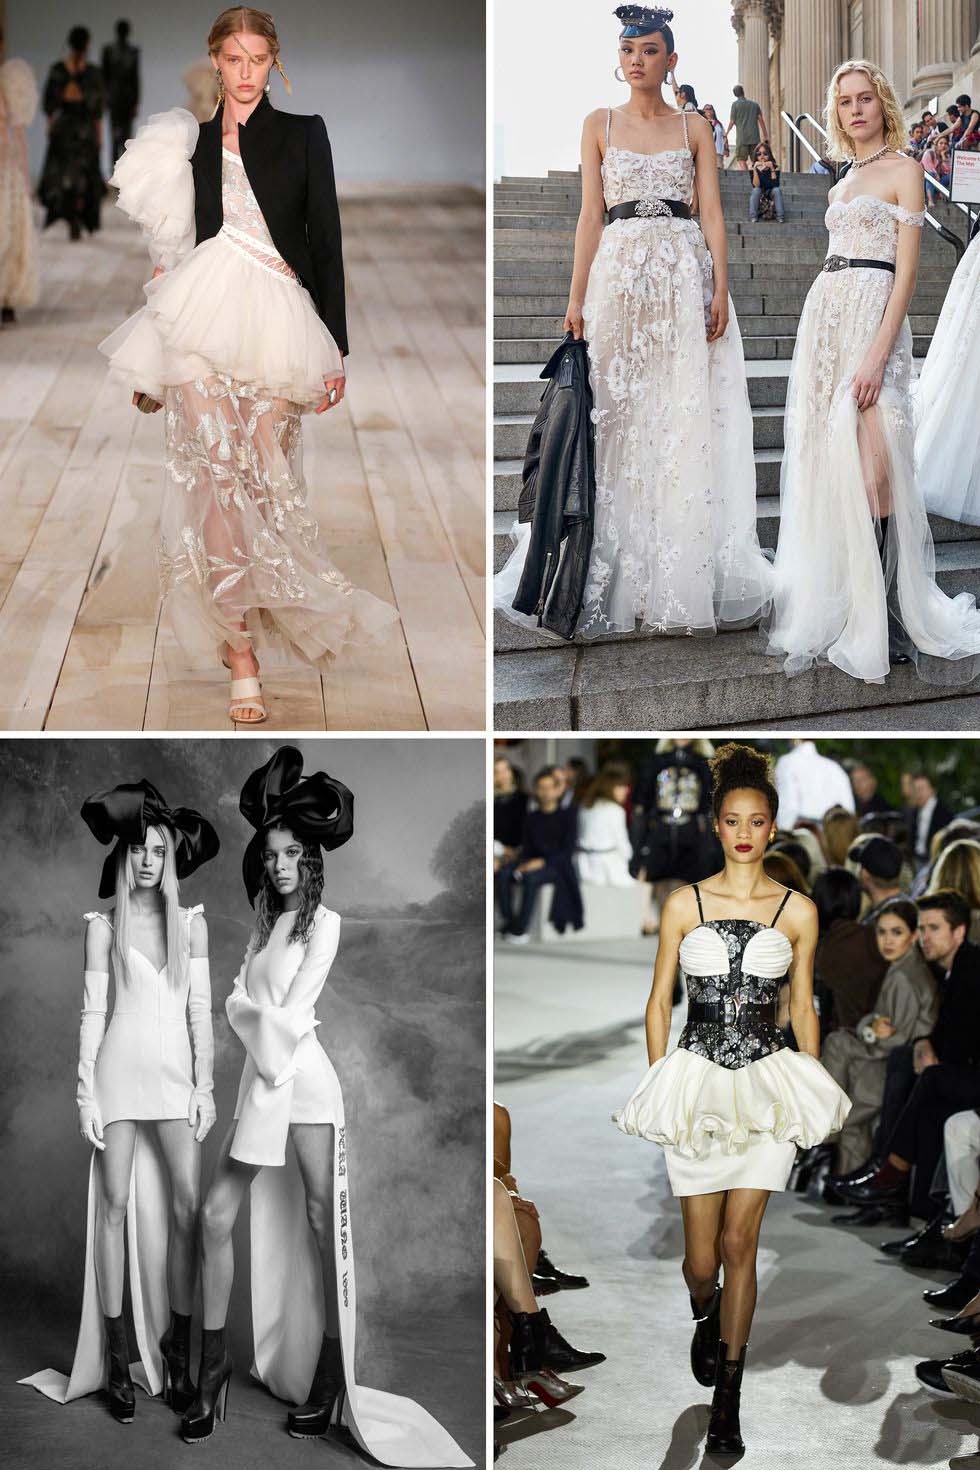 Embellished Wedding Dresses for the Bride Who Wants to Make an Entrance